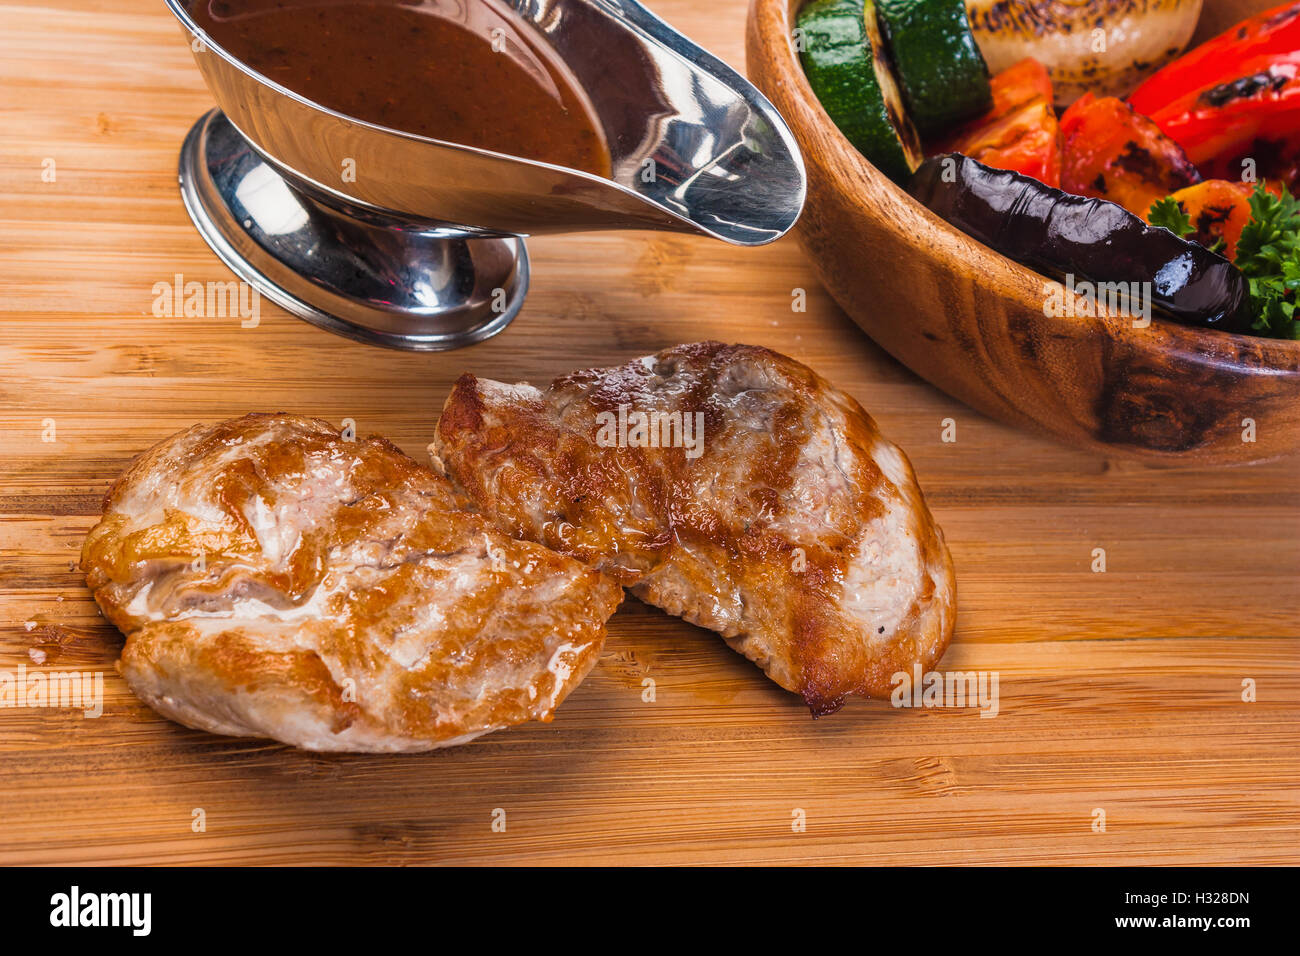 Grilled pork with baked vegetables Stock Photo